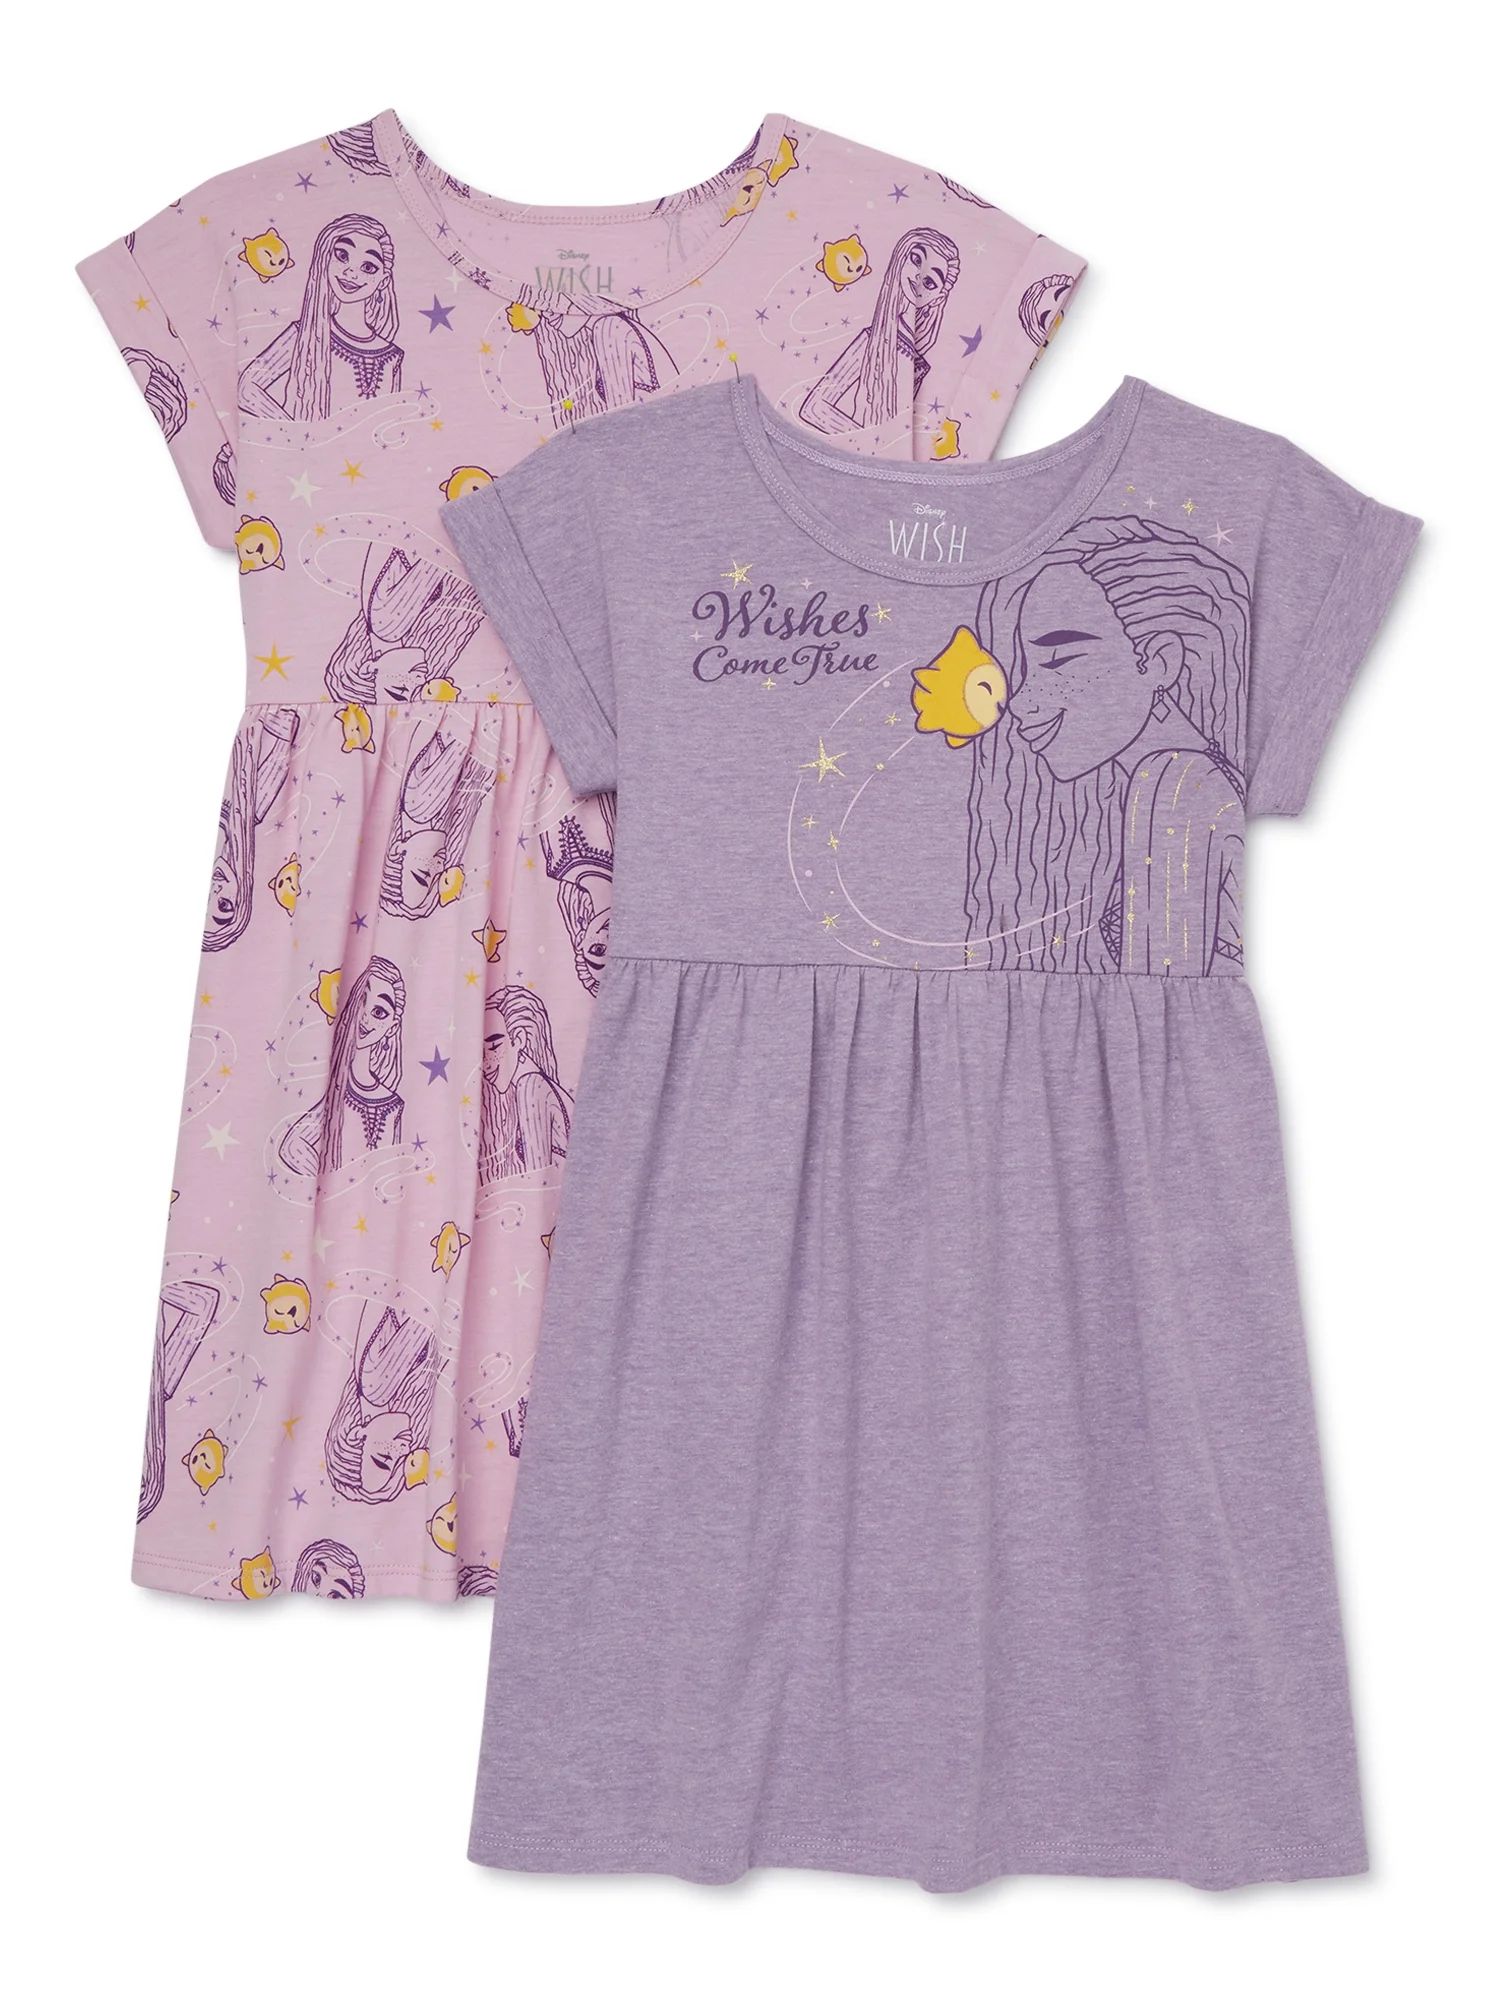 Disney’s Wish Girls’ Play Dress with Short Sleeves, 2-Pack, Sizes 4-16 | Walmart (US)